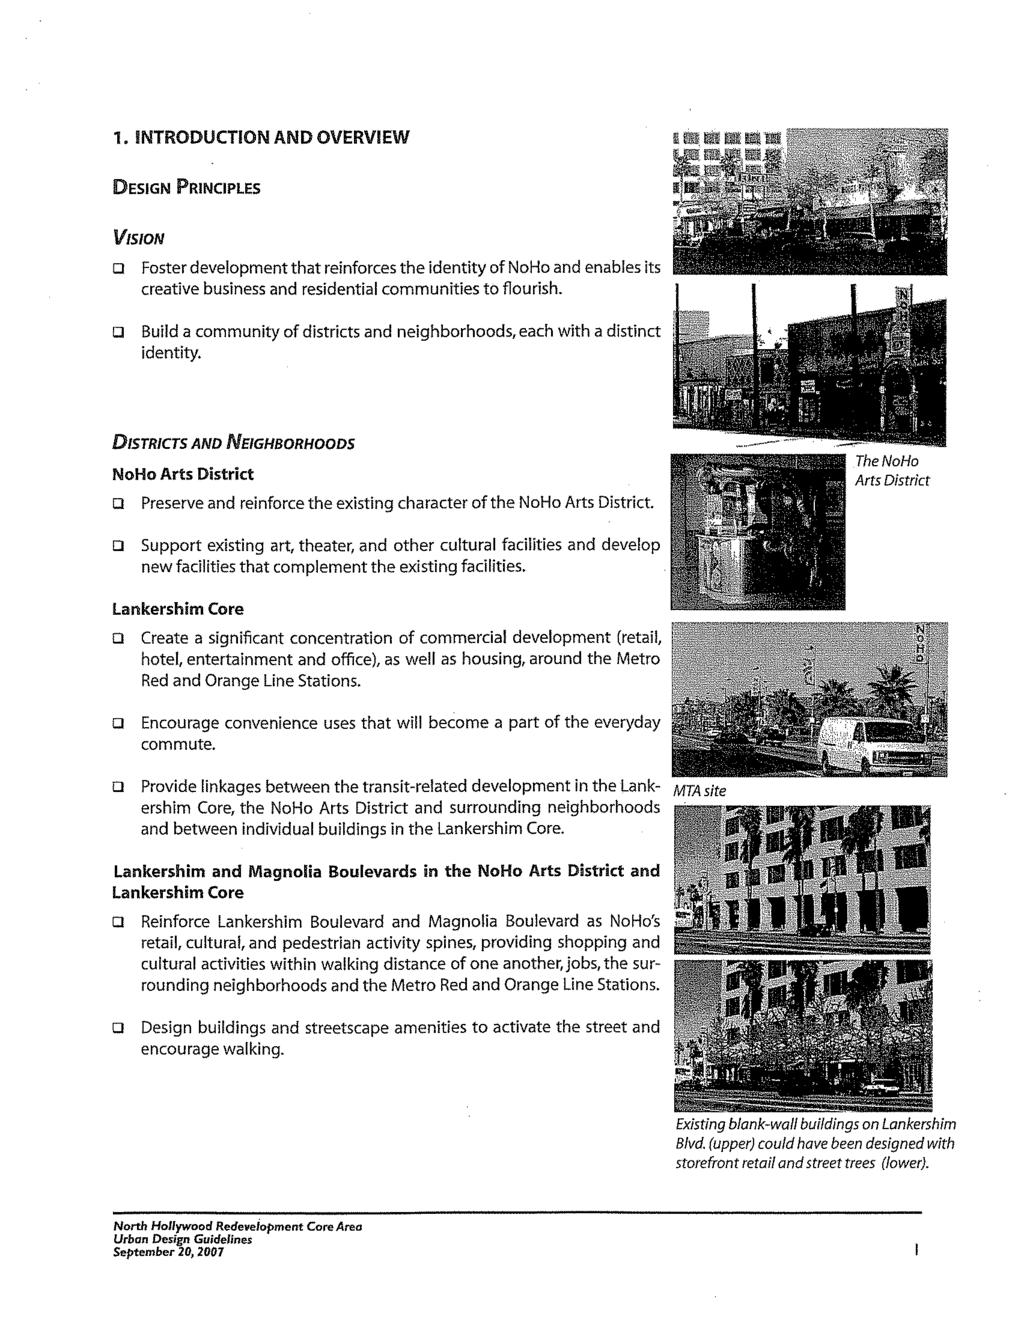 1. INTRODUCTION AND OVERVIEW DESIGN PRINCIPLES VISION o Foster development that reinforces the identity of NoHo and enables its creative business and residential communities to flourish.